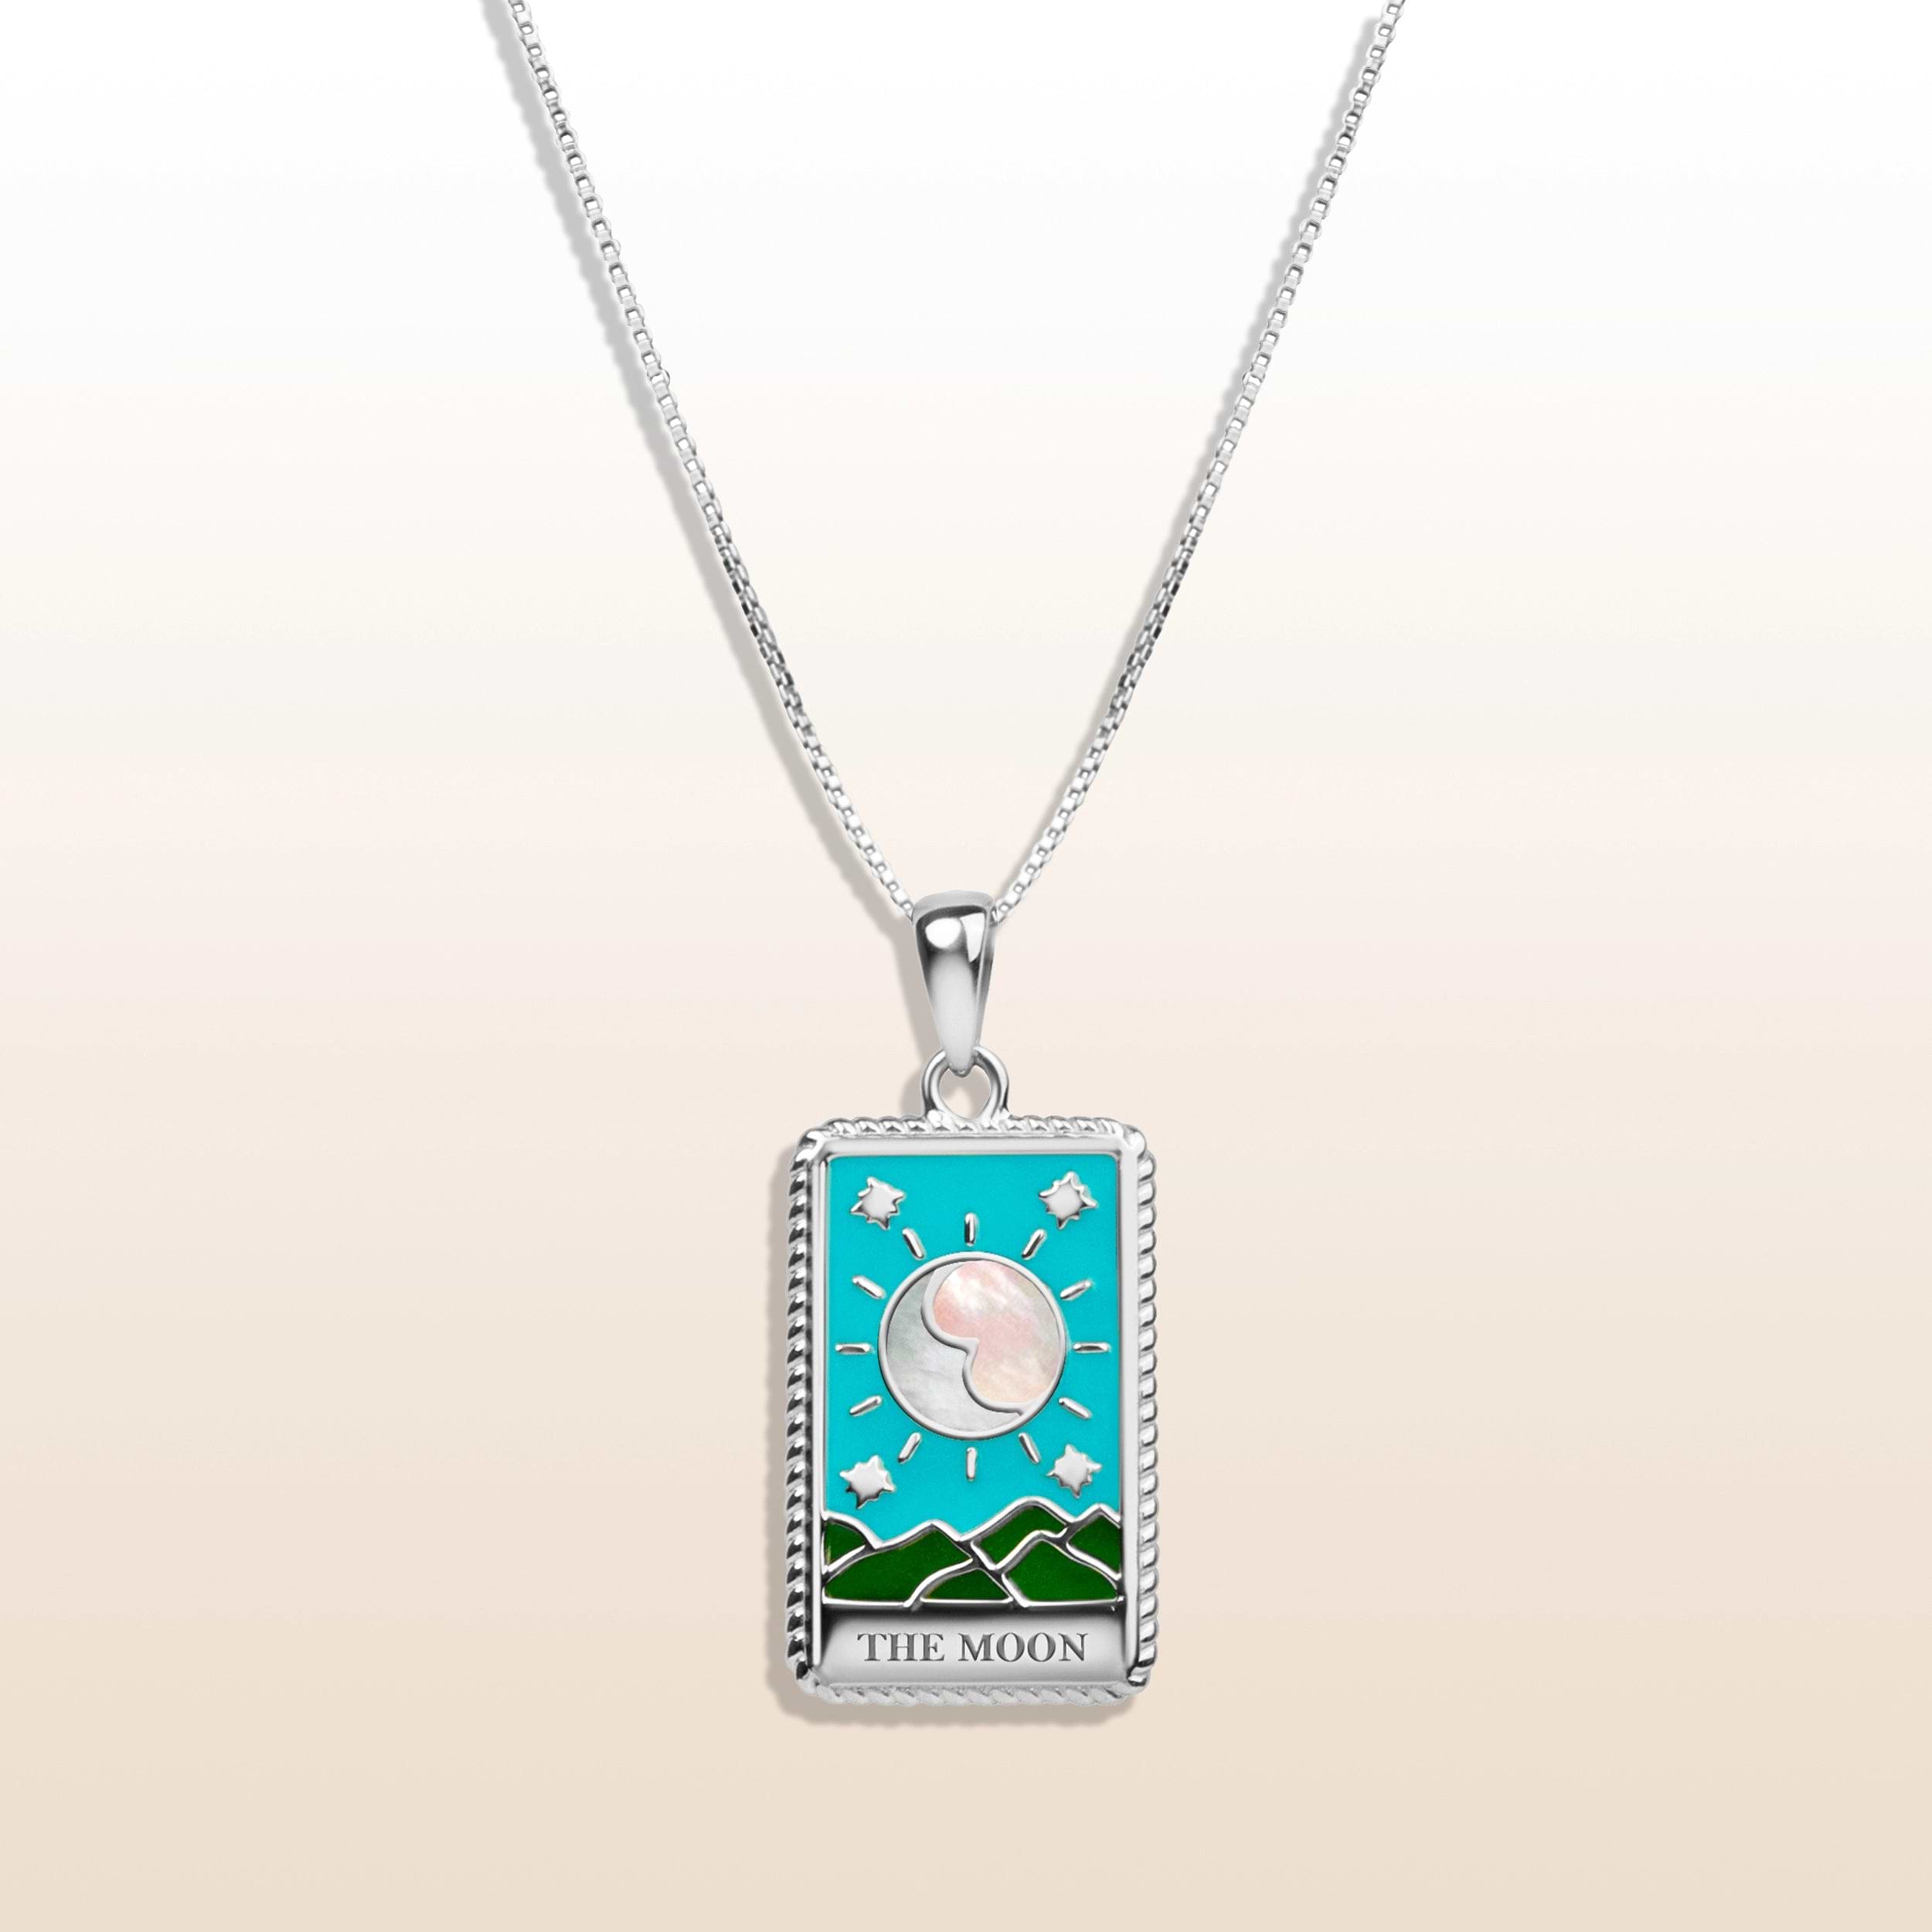 Picture of Trust Your Intuition - "The Moon" Tarot Card Necklace